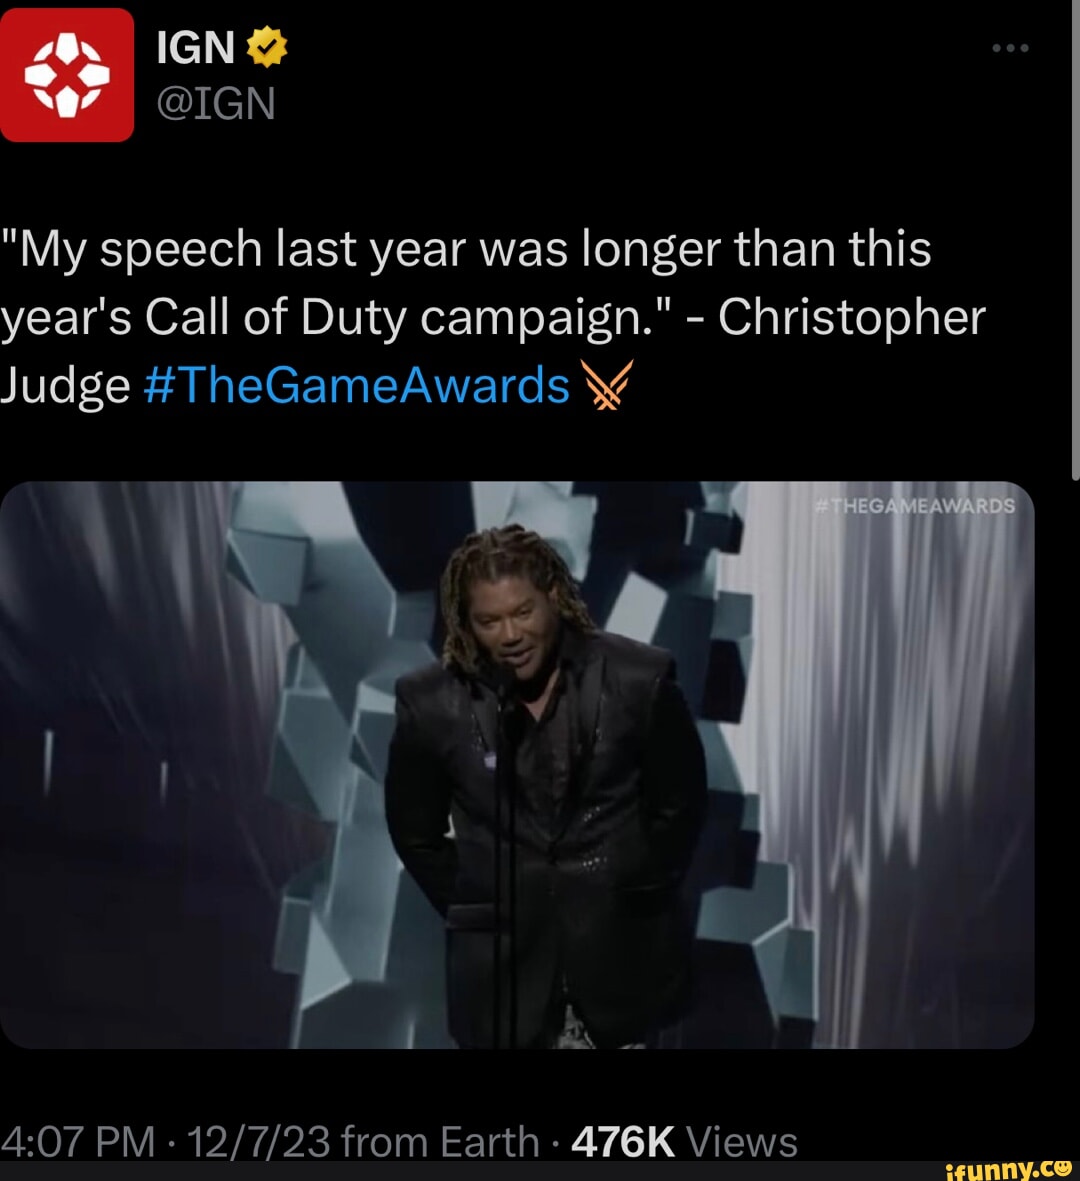 IGN - My speech was actually longer than this year's Call